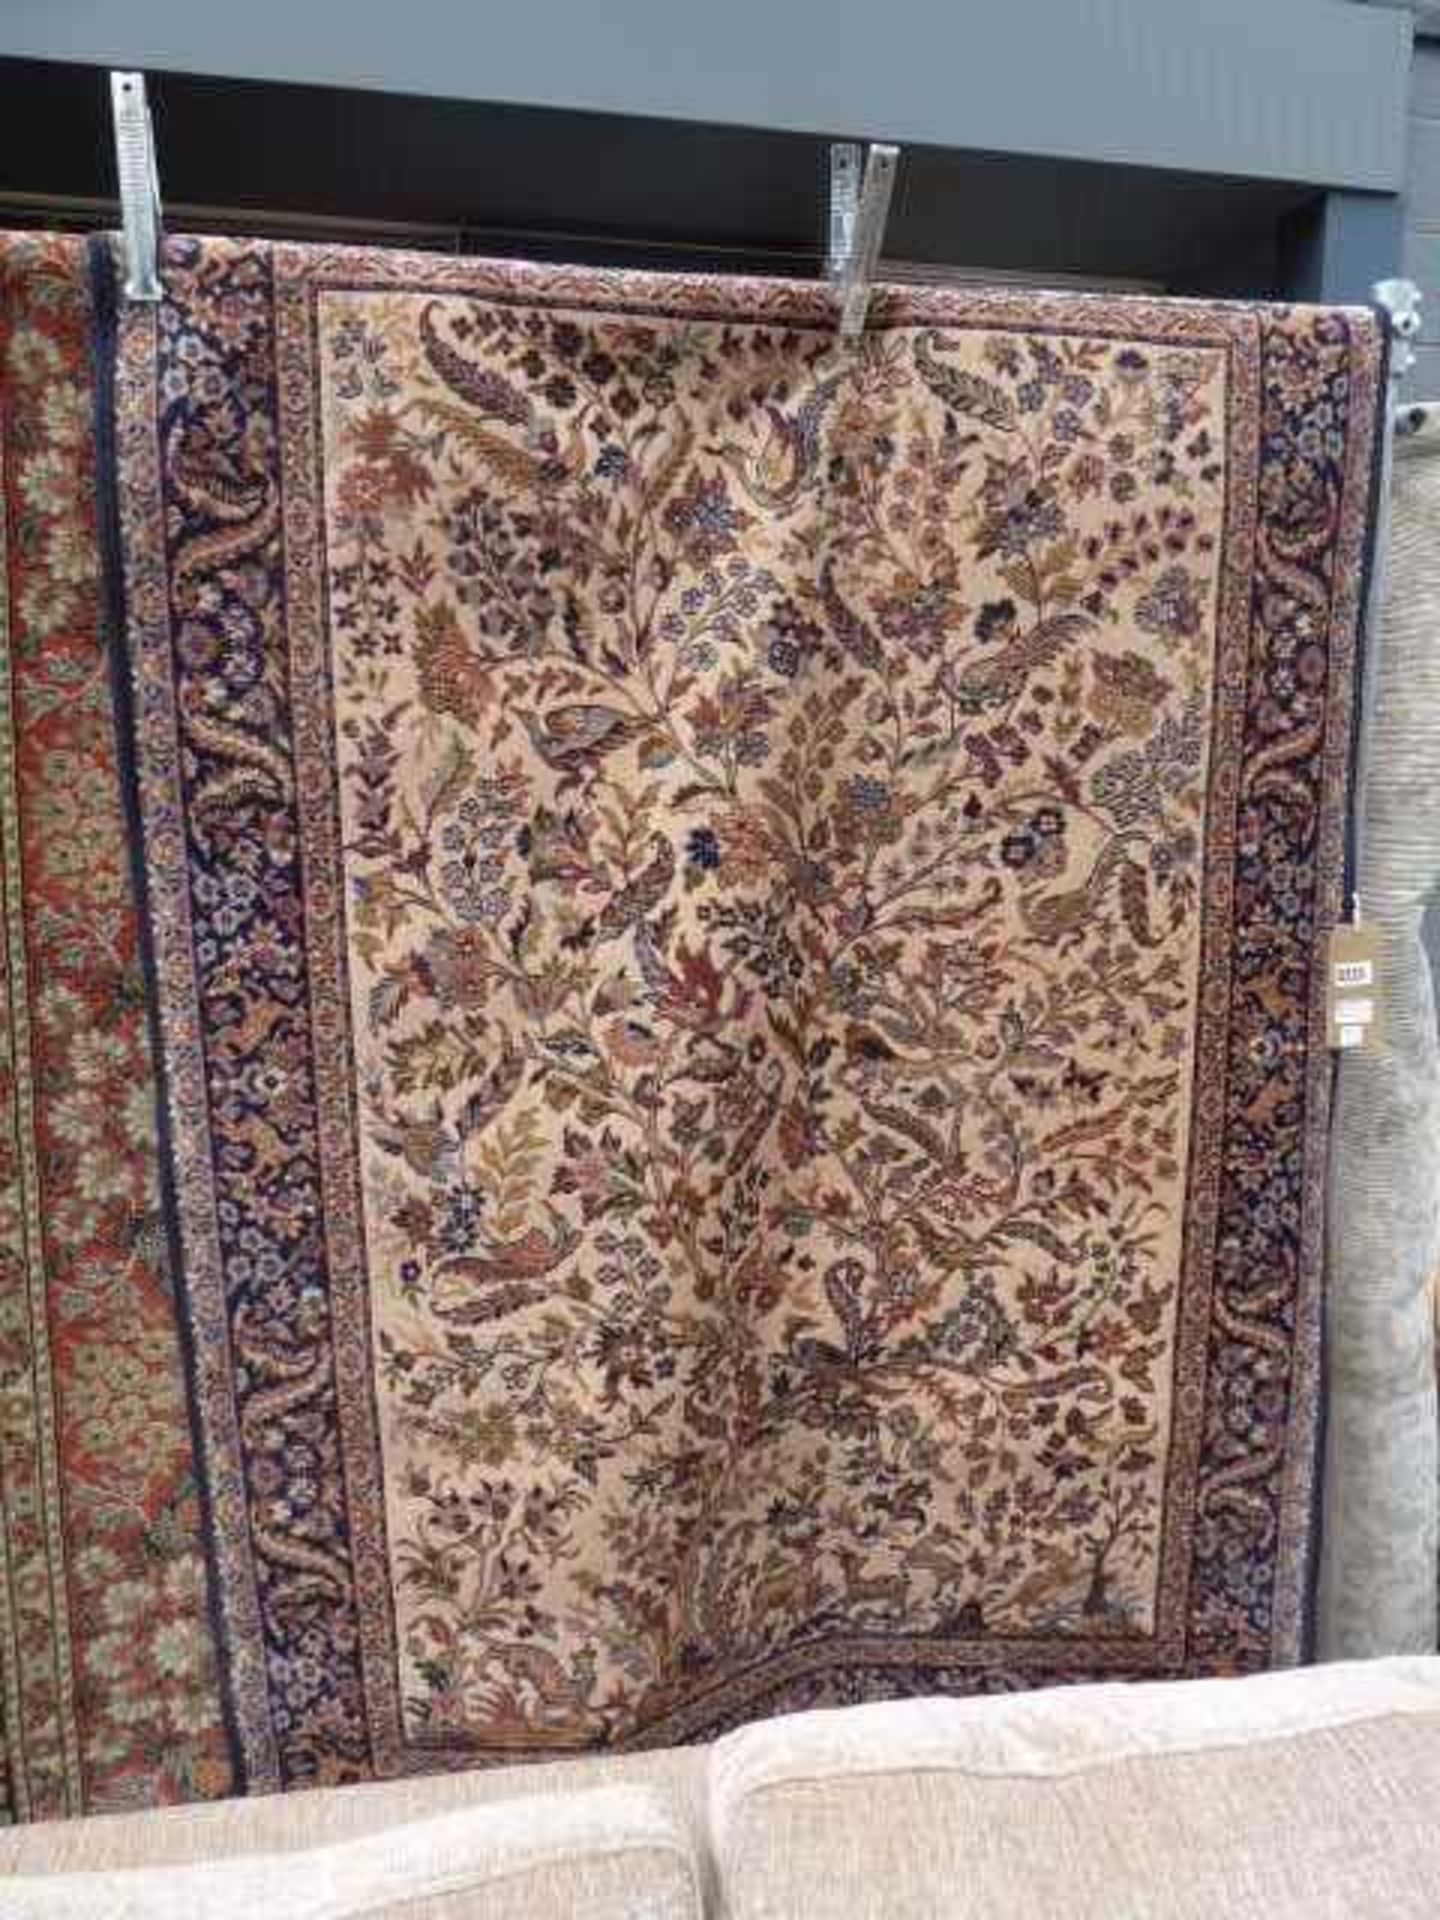 (5) Woolen carpet with bird and animal pattern